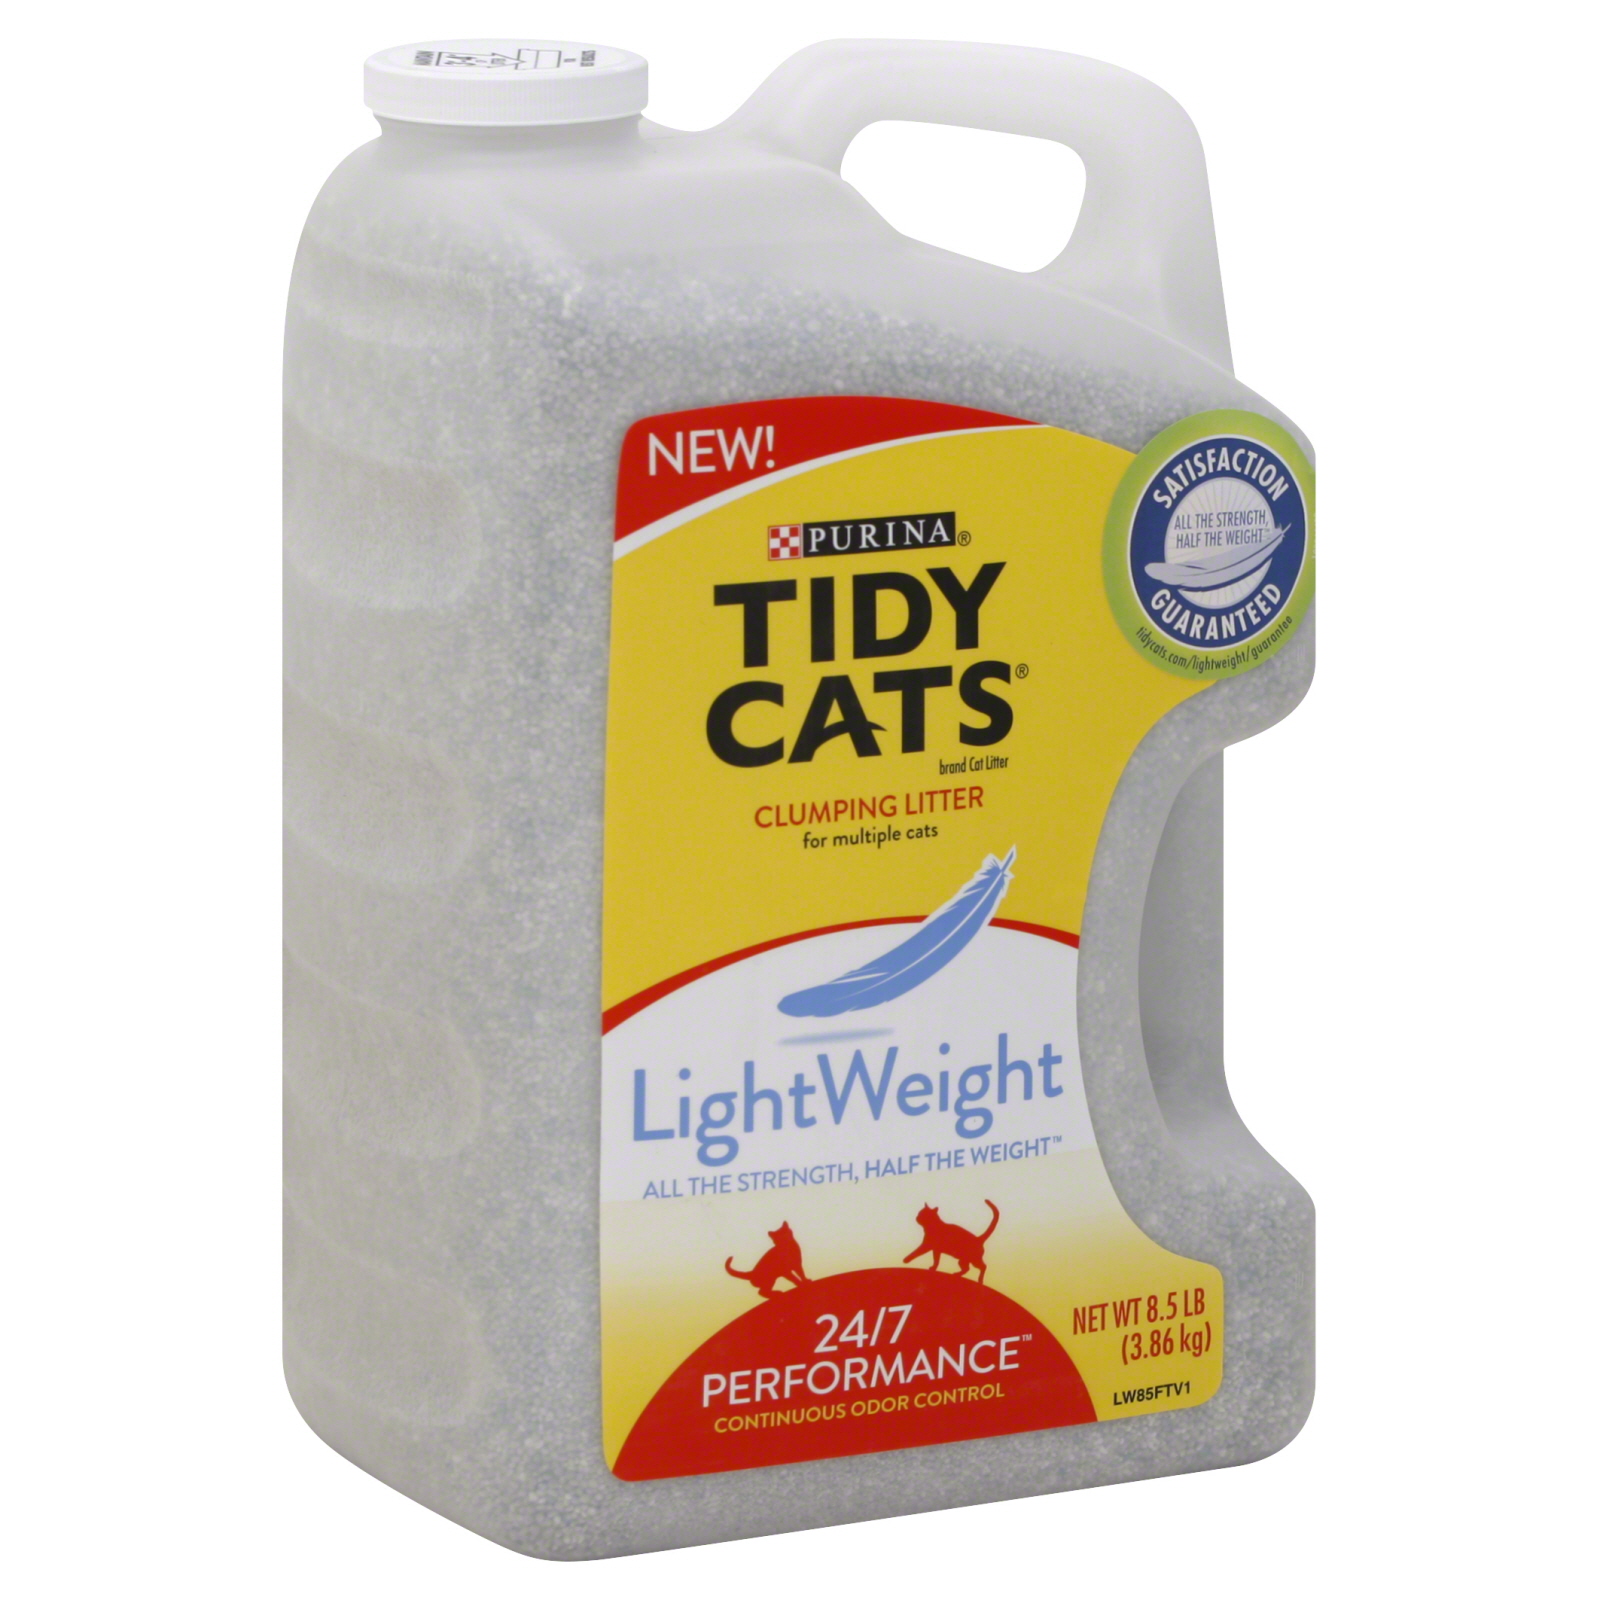 Tidy Cats LightWeight Clumping Litter 24/7 Performance for Multiple